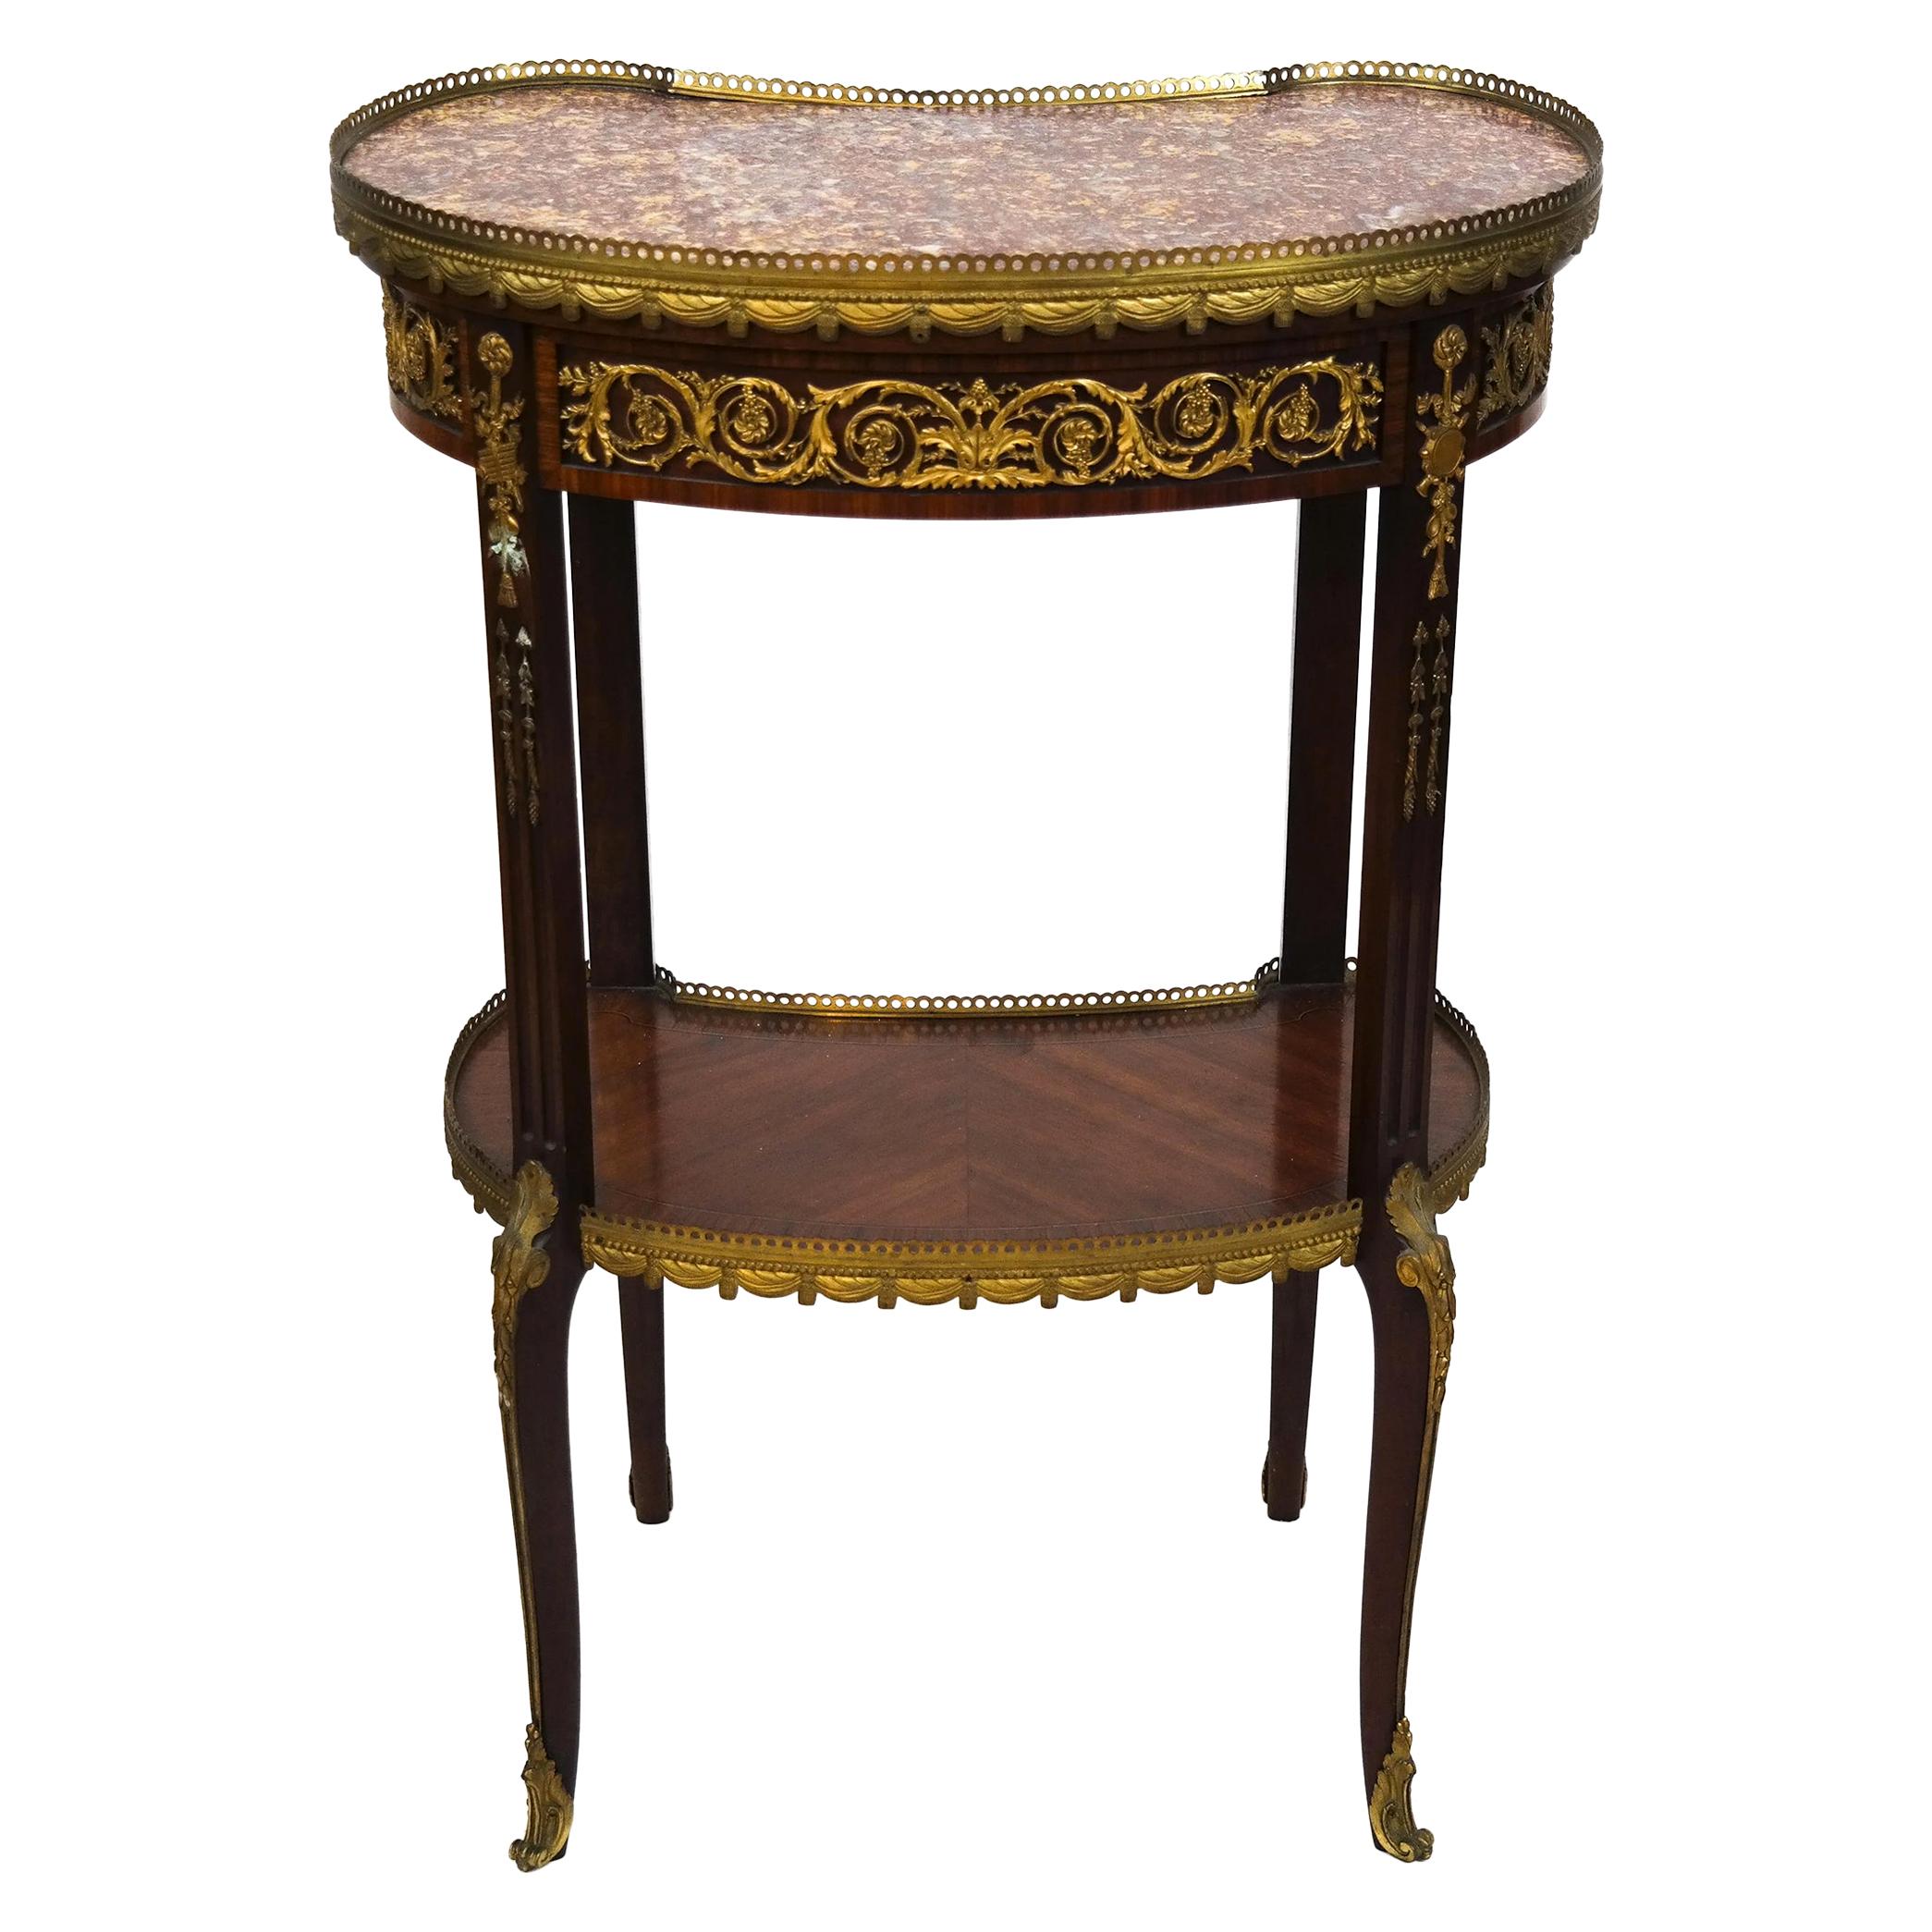 Louis XVI Style Gilt-Bronze Mounted Kidney-Shaped Side Table